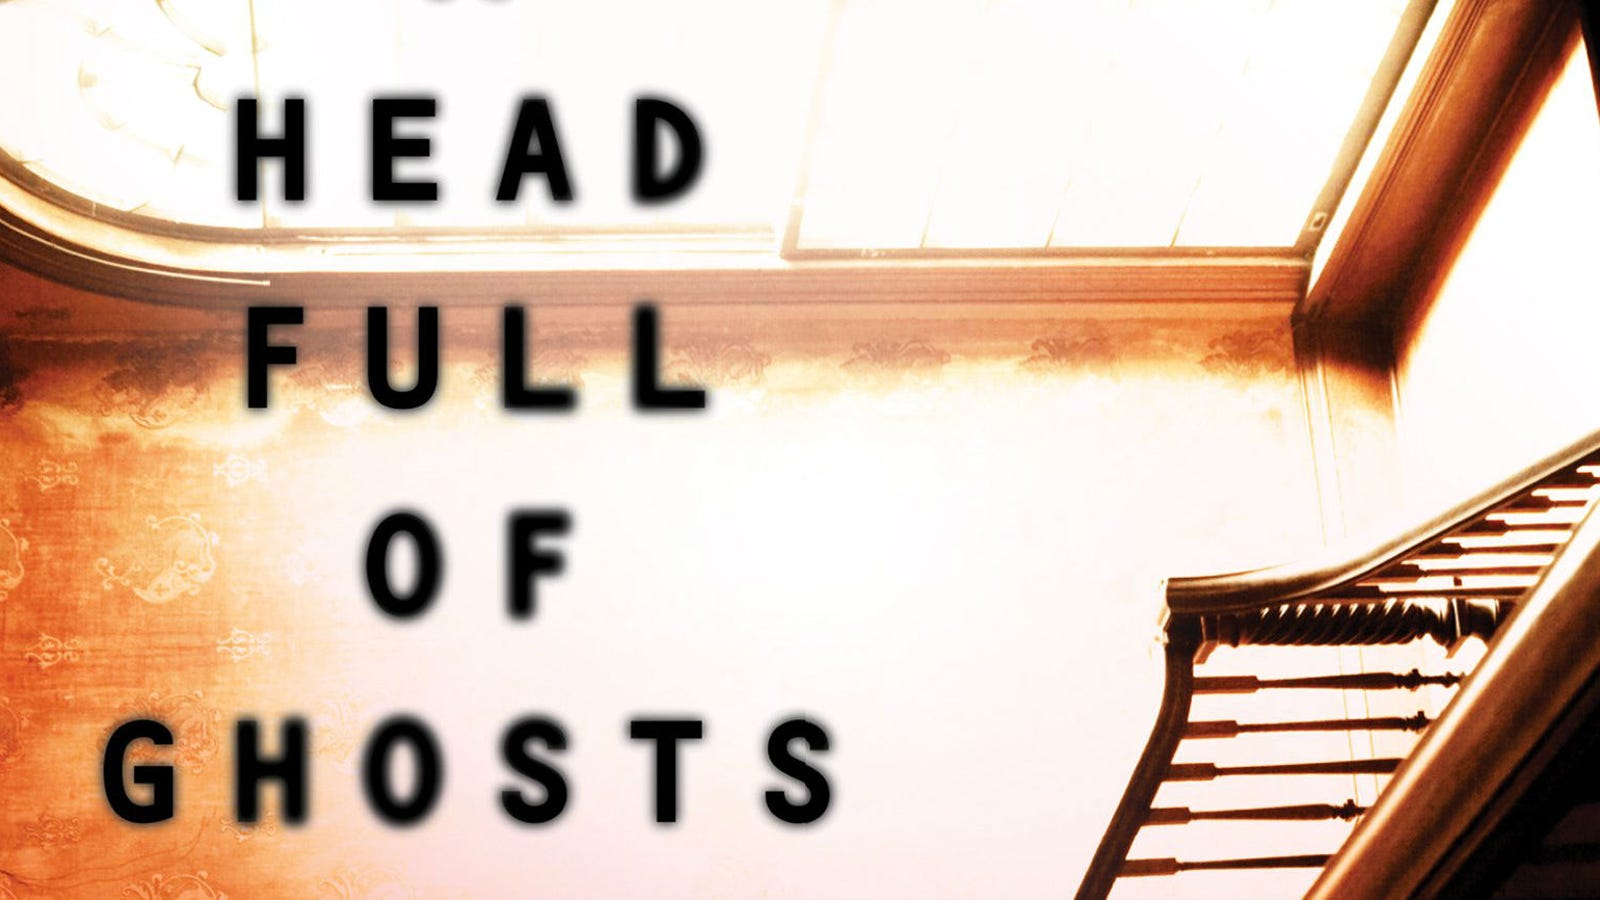 A Head Full of Ghosts by Paul Tremblay